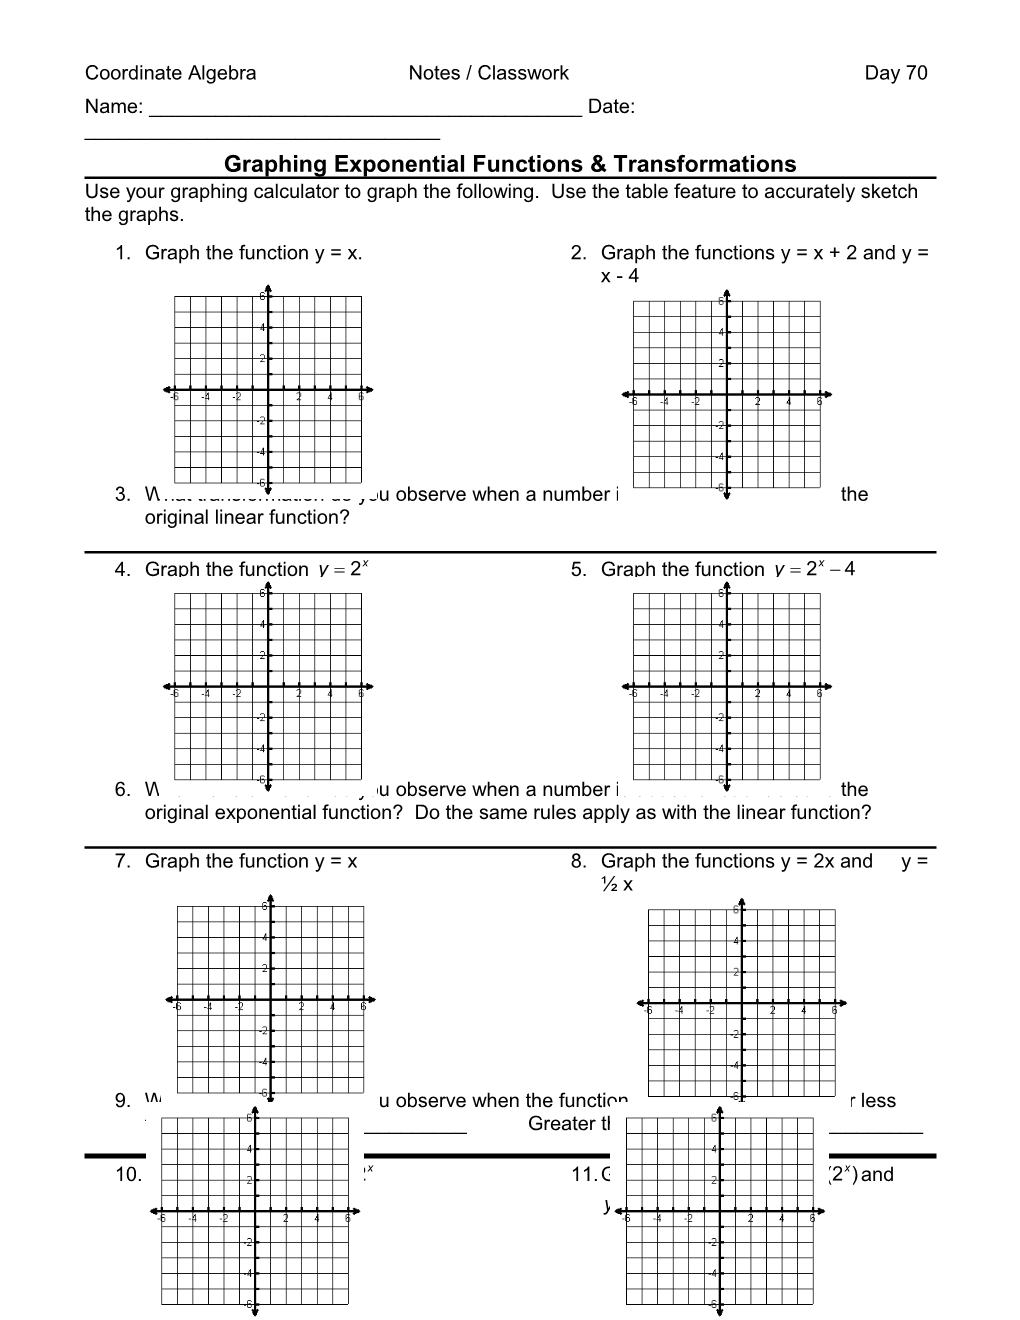 Graphing Exponential Functions & Transformations